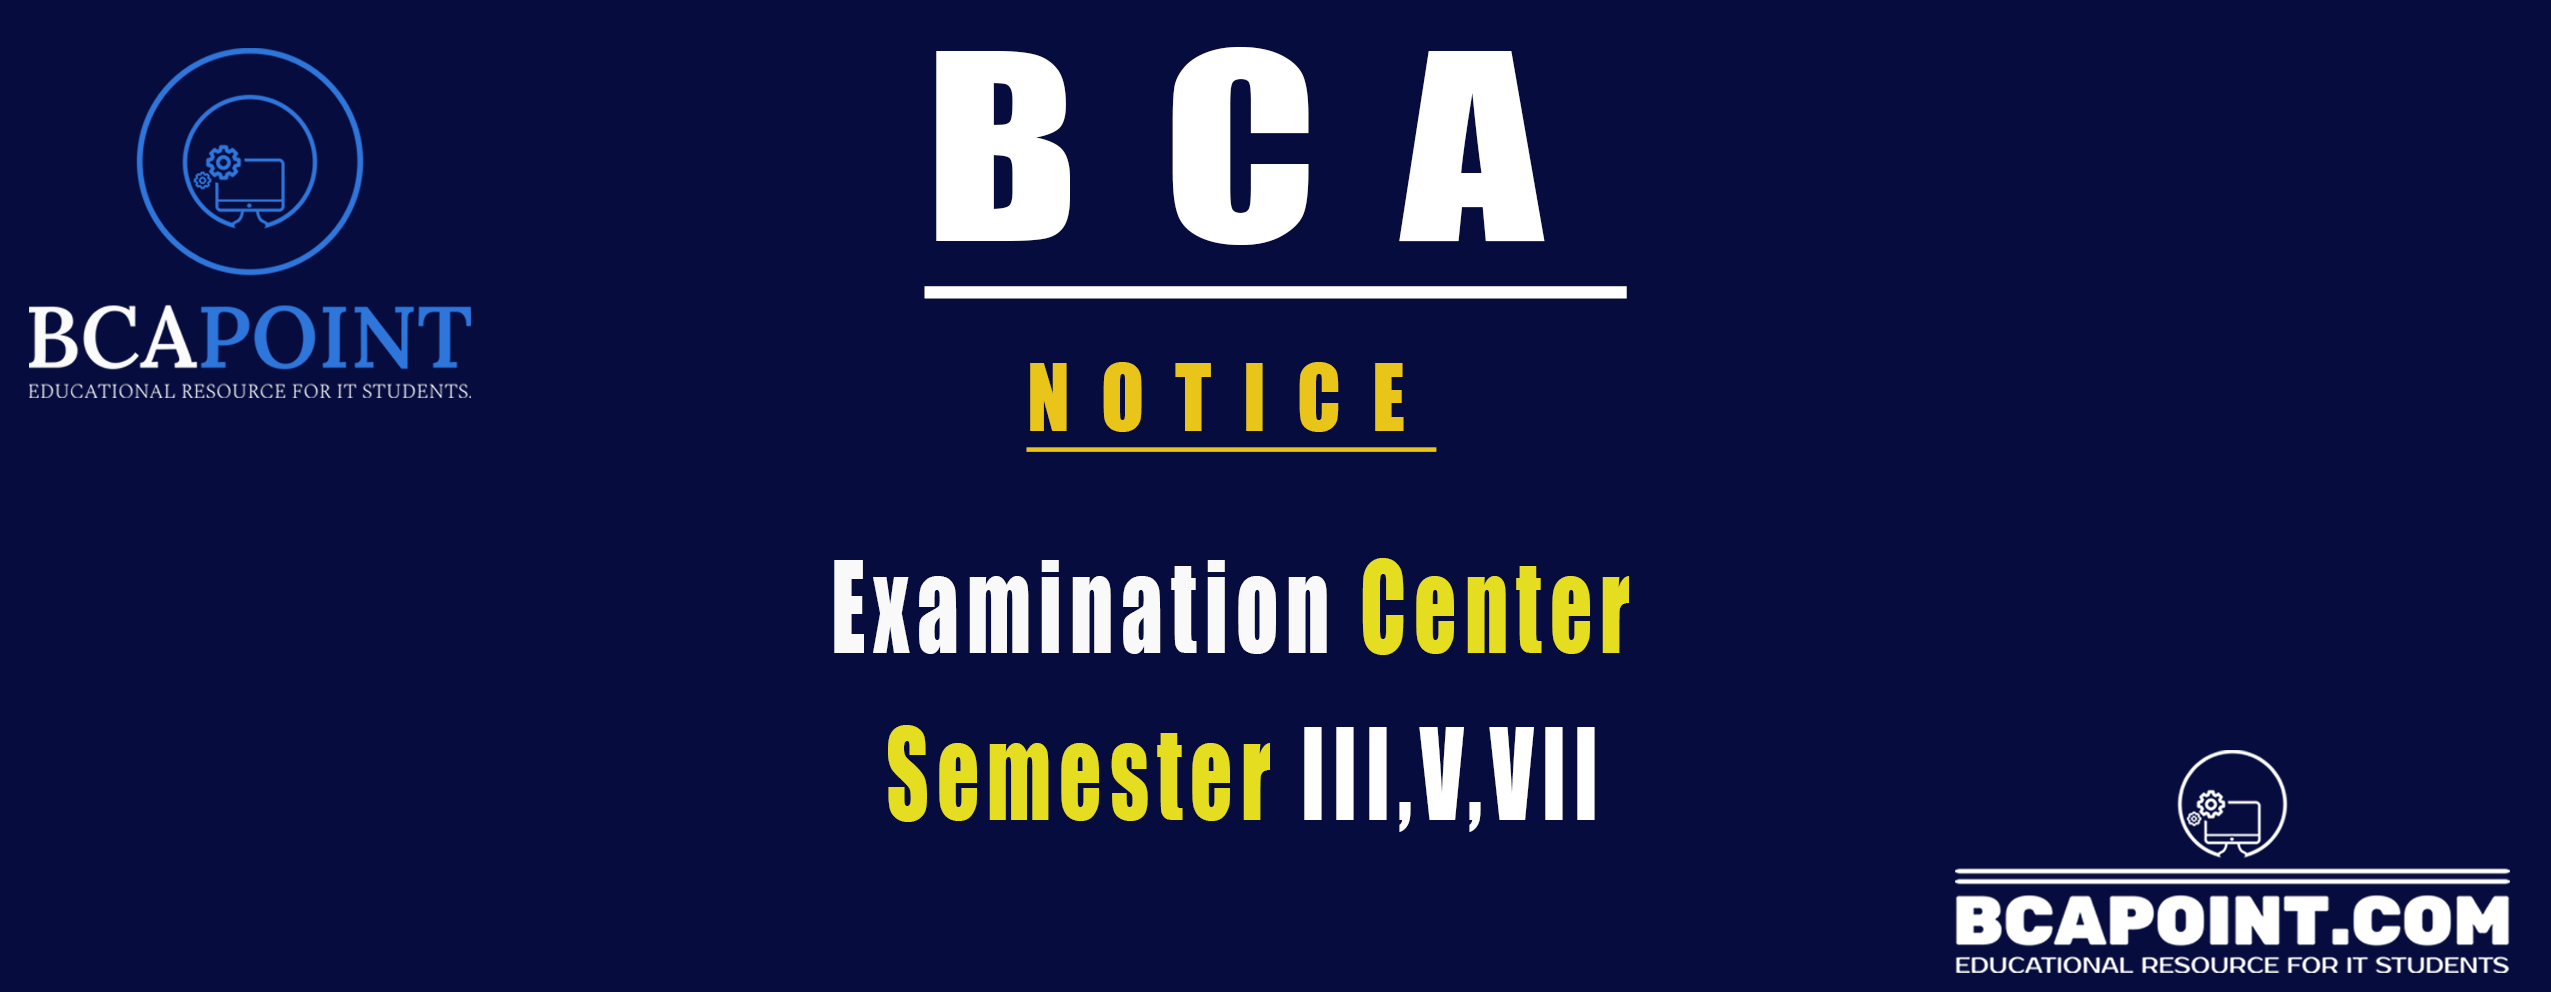 You are currently viewing Examination Center for BCA Third, Fifth, & Seventh Semester Students.